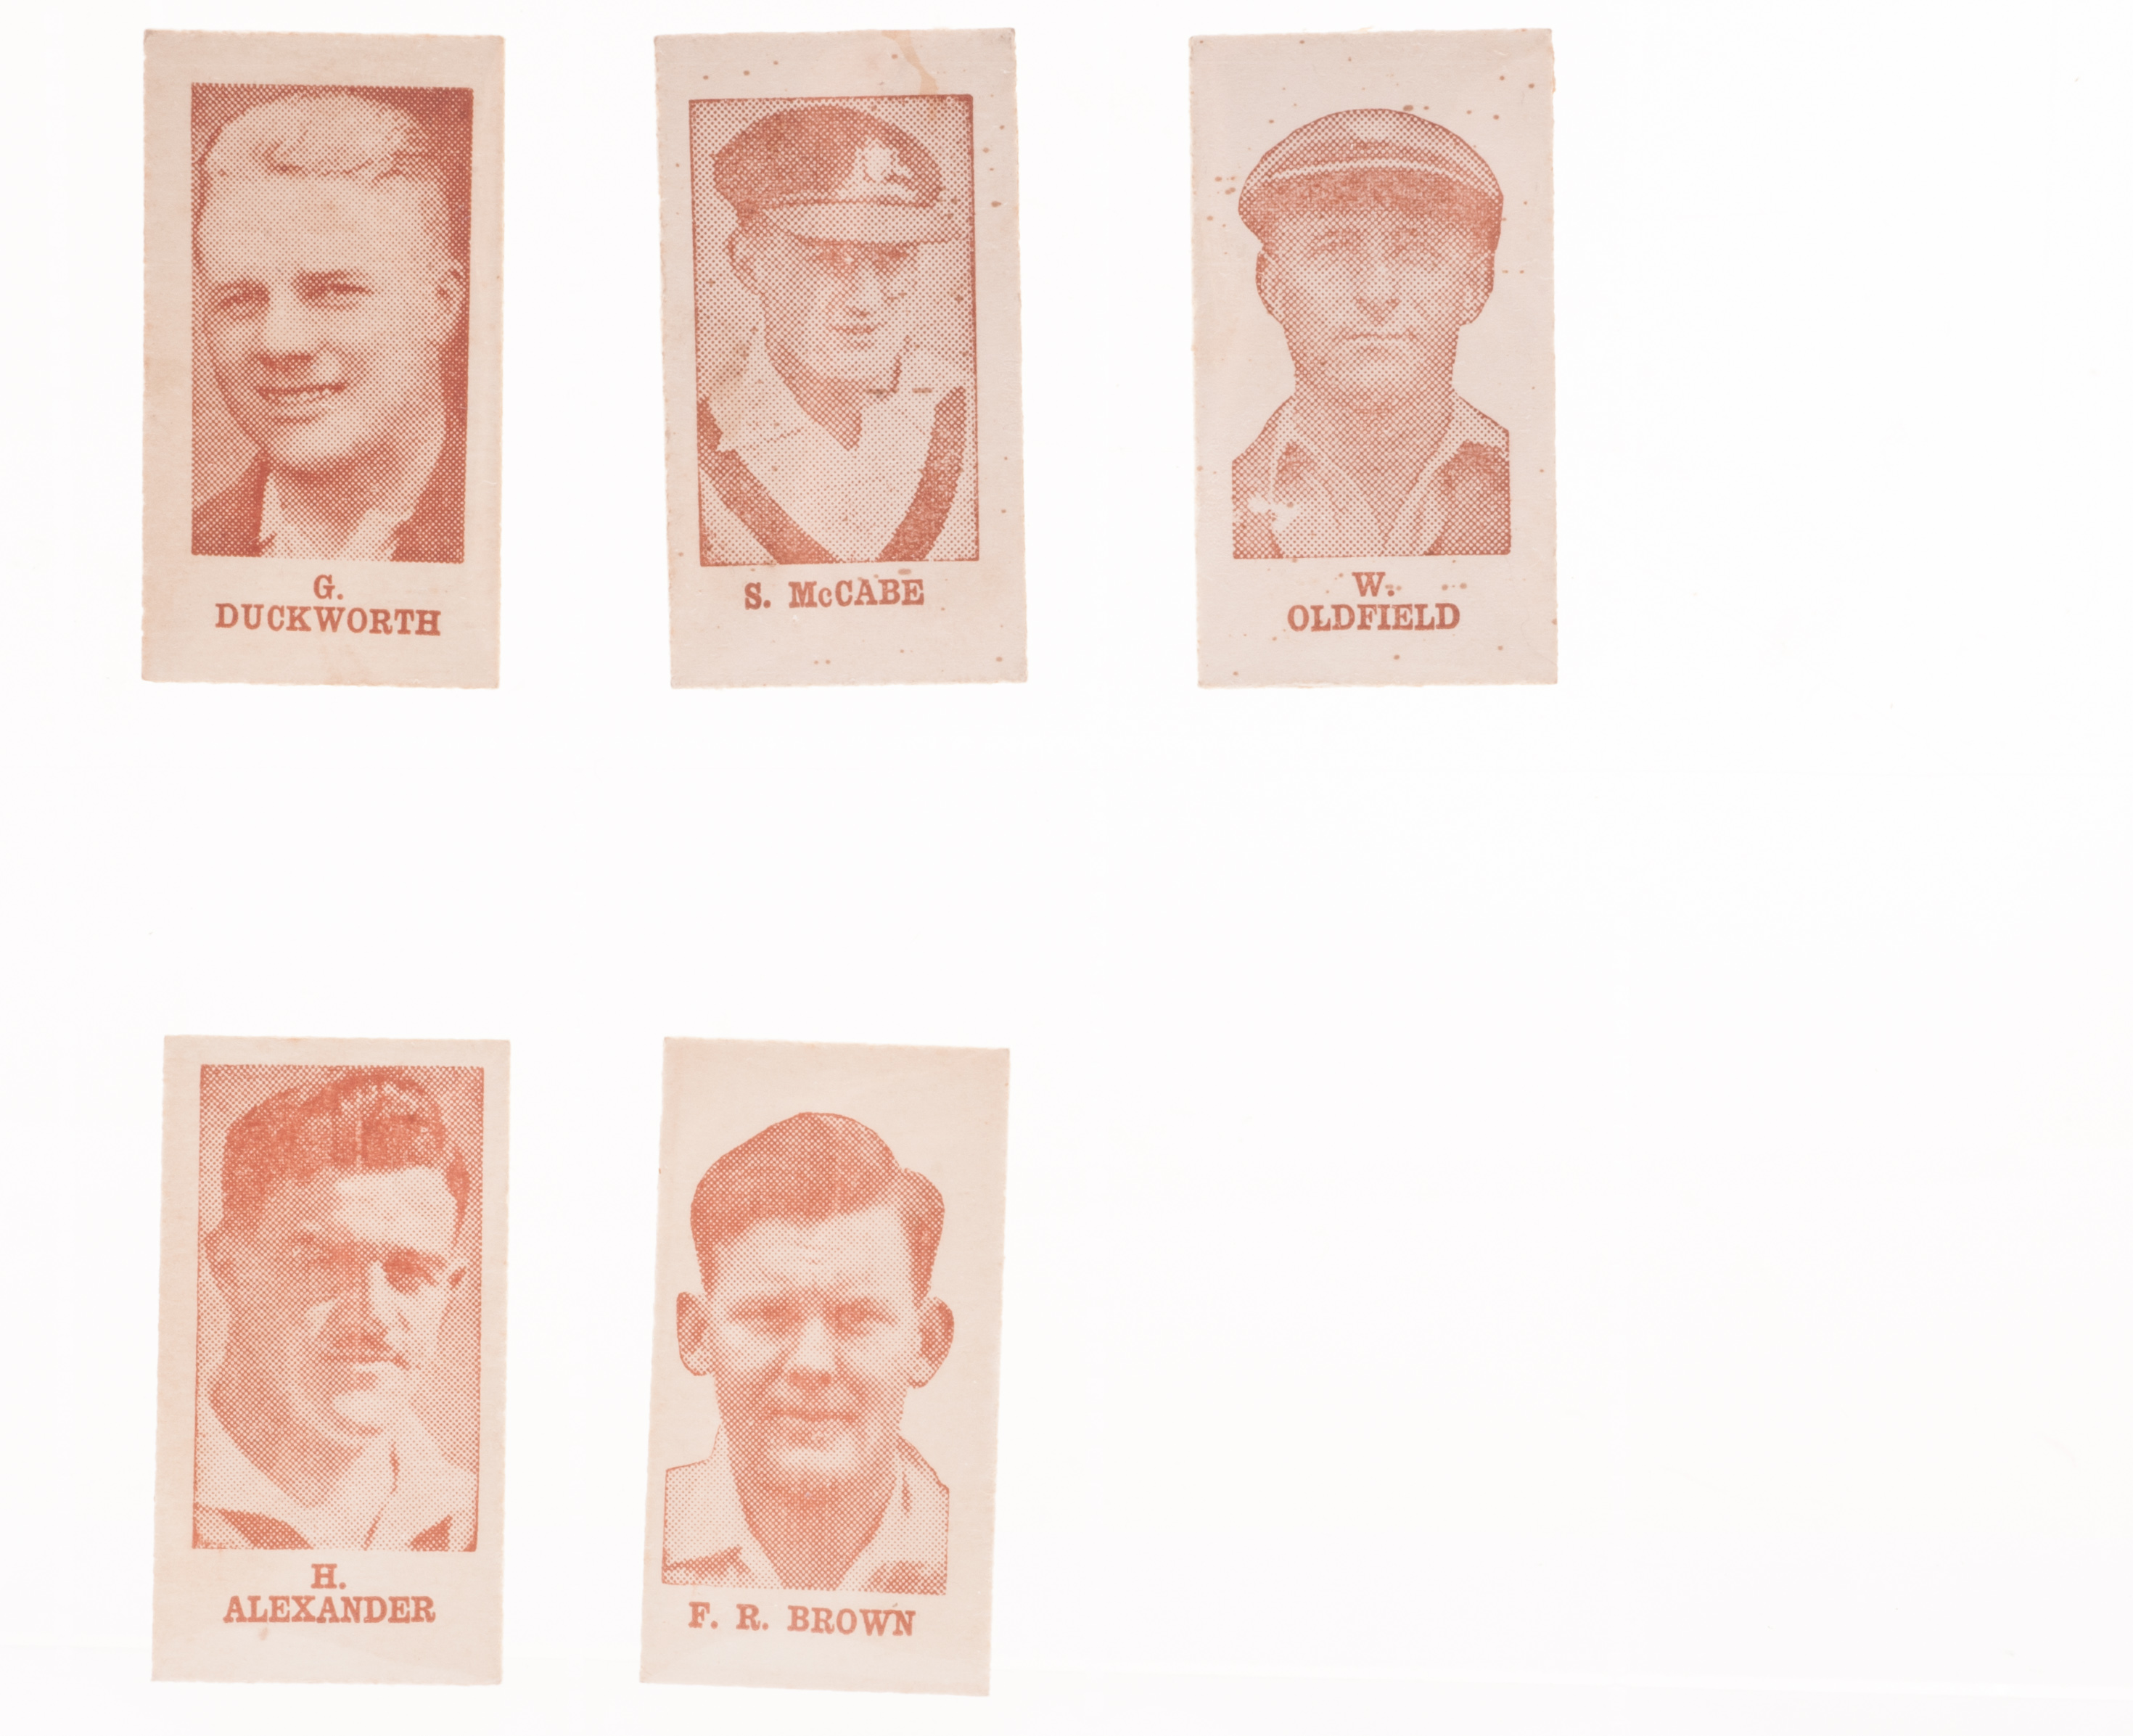 Trade cards: Cricket, Australia, W & T Avery, Cricketers, 1933, 5 cards, H. Alexander, F.R. Brown,